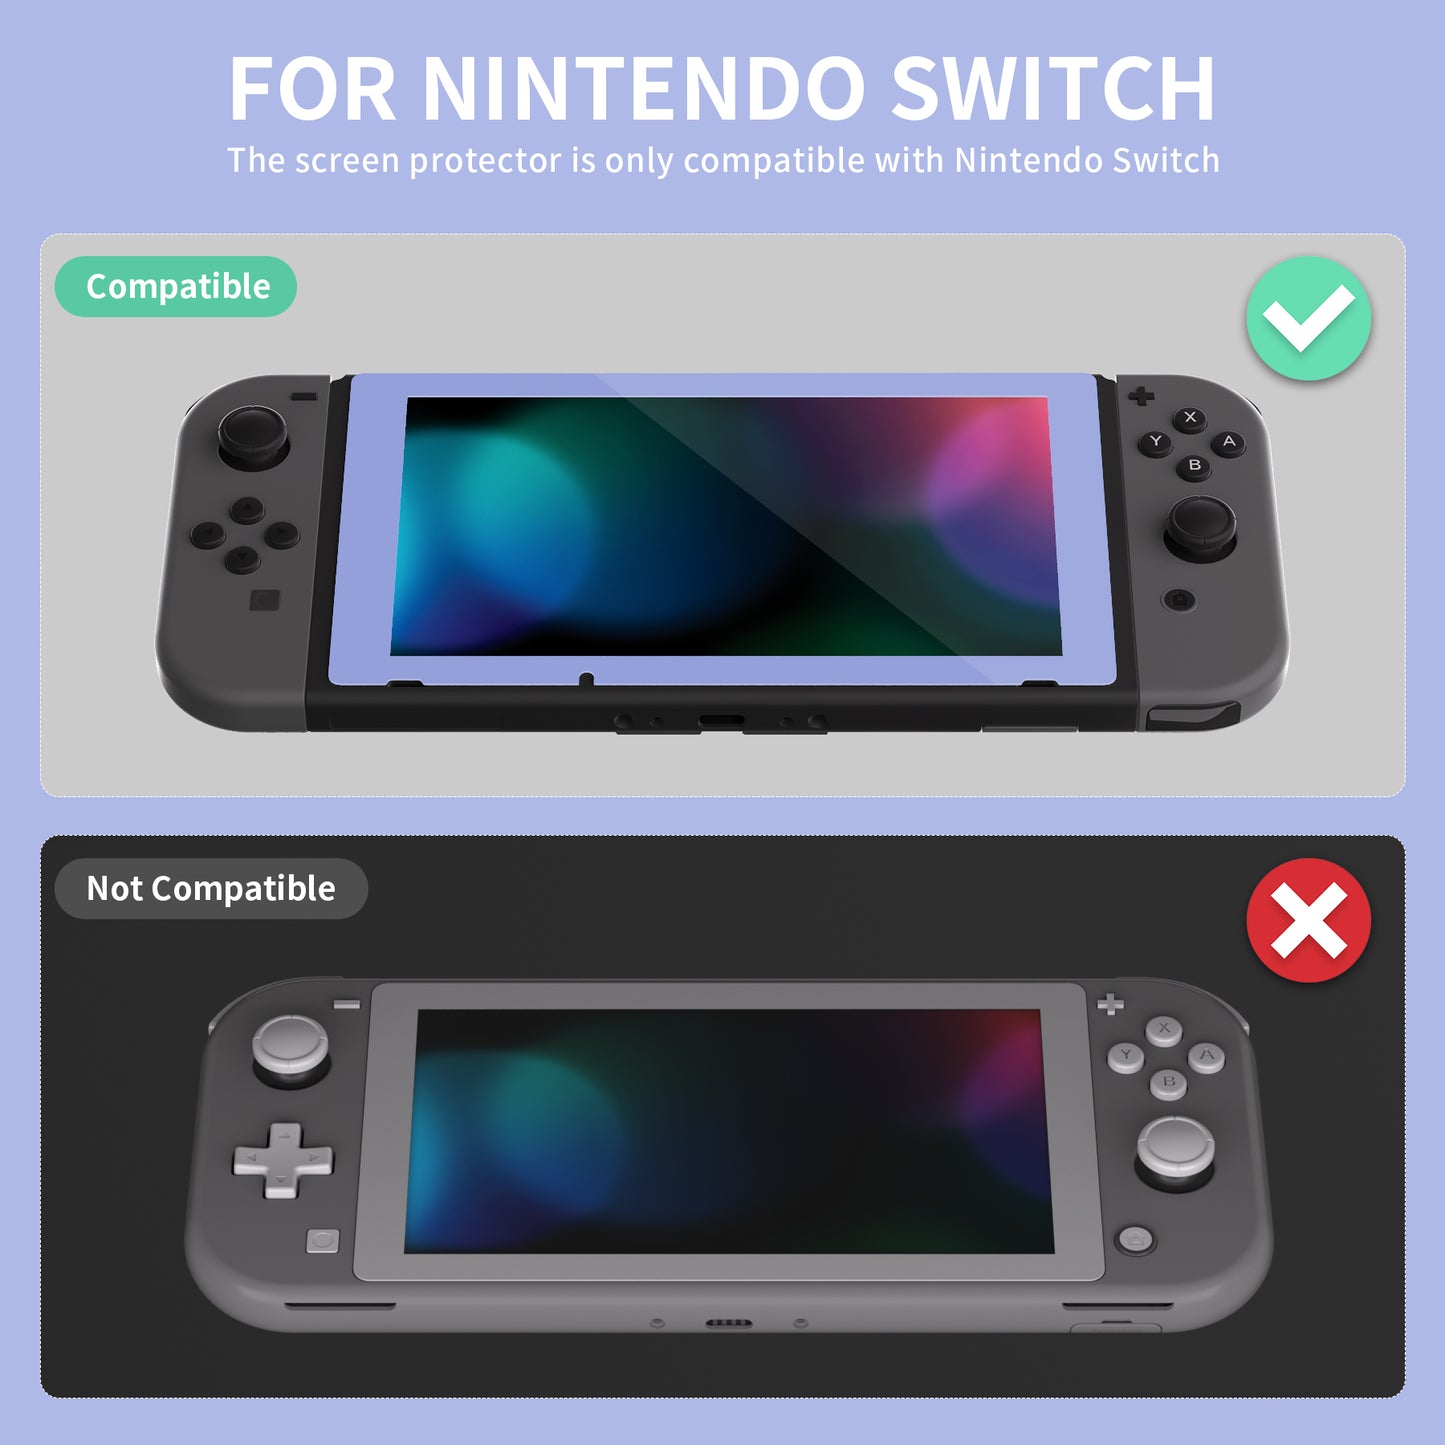 2 Pack Light Violet Border Transparent HD Clear Saver Protector Film, Tempered Glass Screen Protector for Nintendo Switch [Anti-Scratch, Anti-Fingerprint, Shatterproof, Bubble-Free] - NSPJ0705 playvital